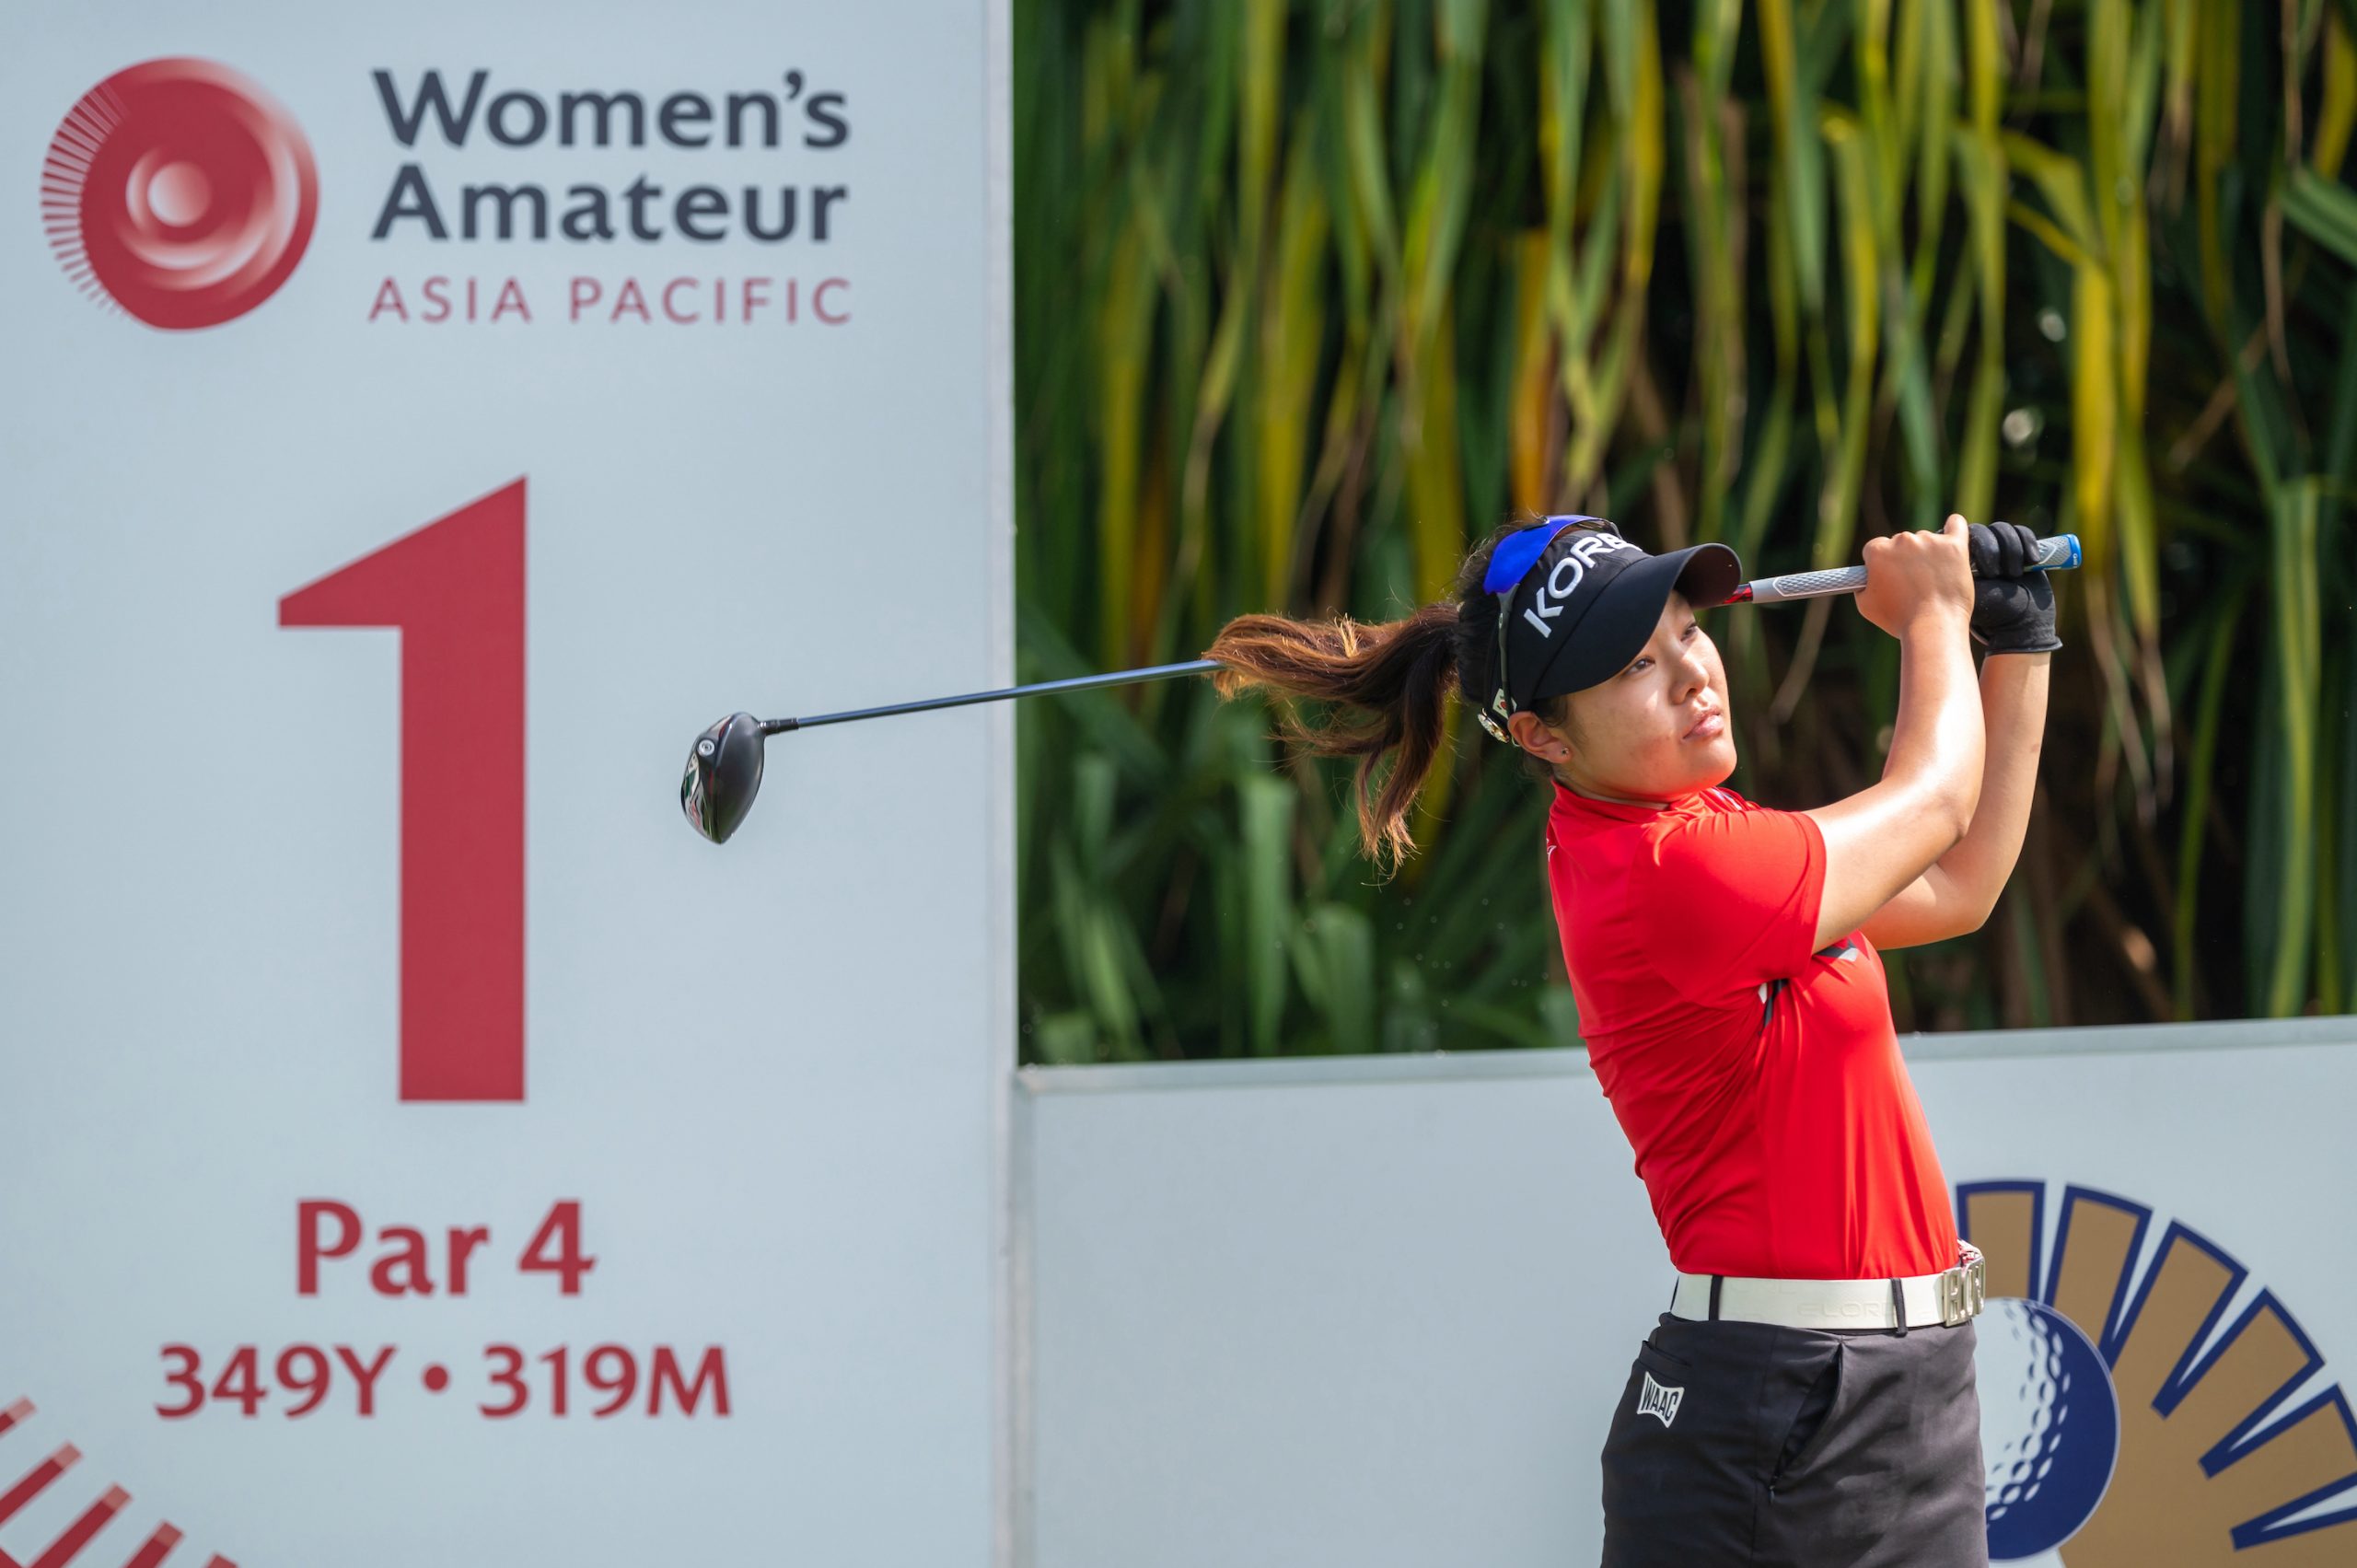 Korea And Thailand Joined By Debutants Qatar And Lebanon At The Womens Amateur Asia Pacific 